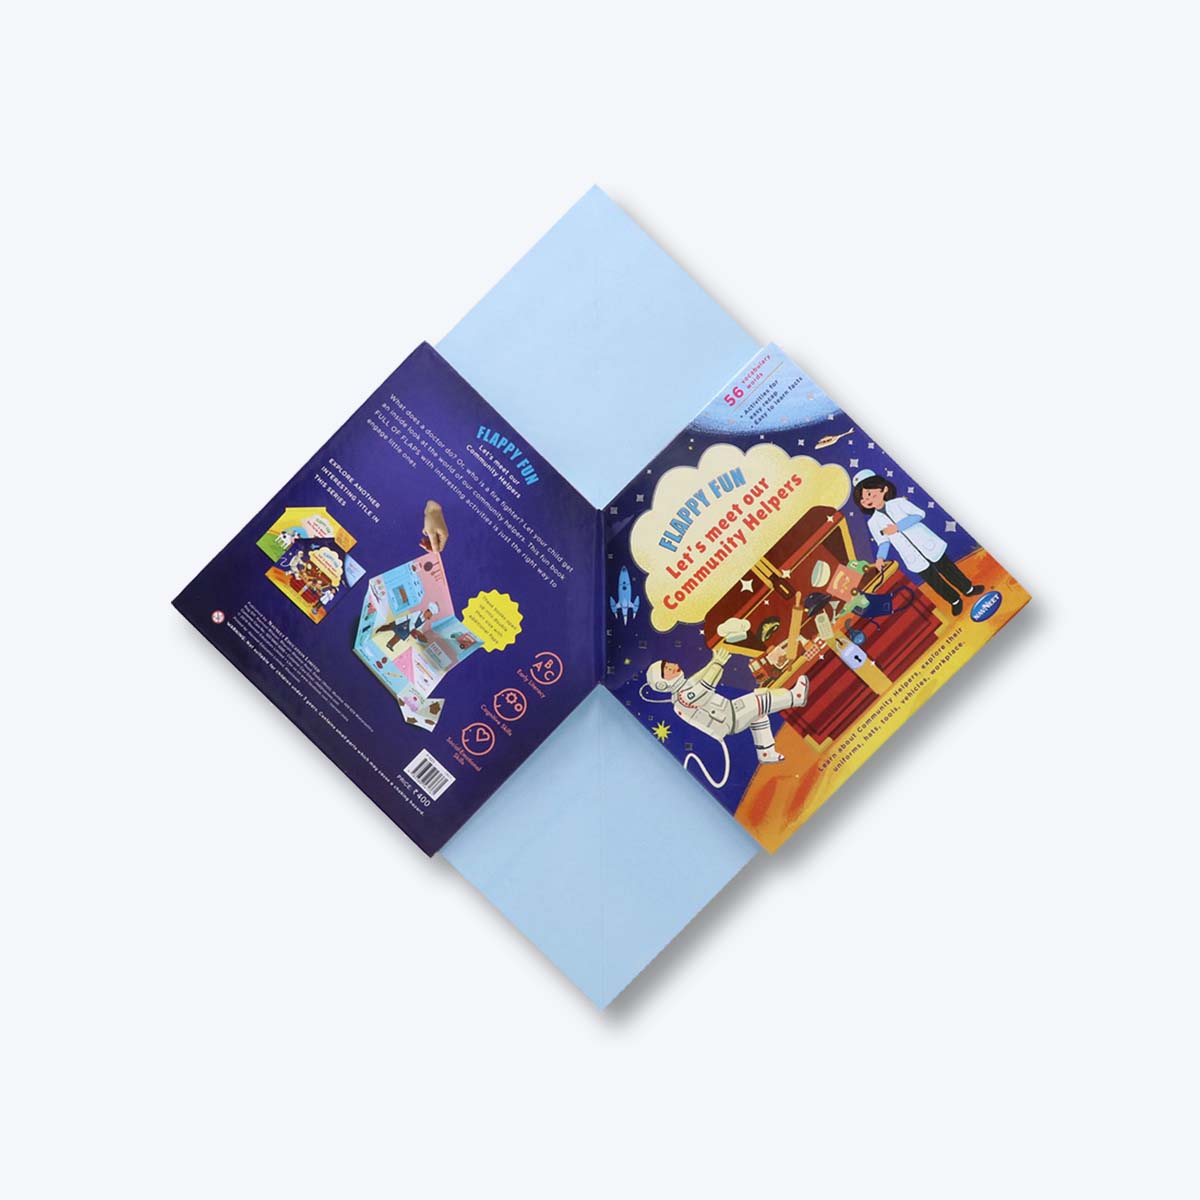 Navneet Flappy Fun Picture Book for preschooler- Lets meet our Community Helpers- Innovative Pop Up Book for gifting- Learn about their uniforms, hats, tools, vehicles, workplace.